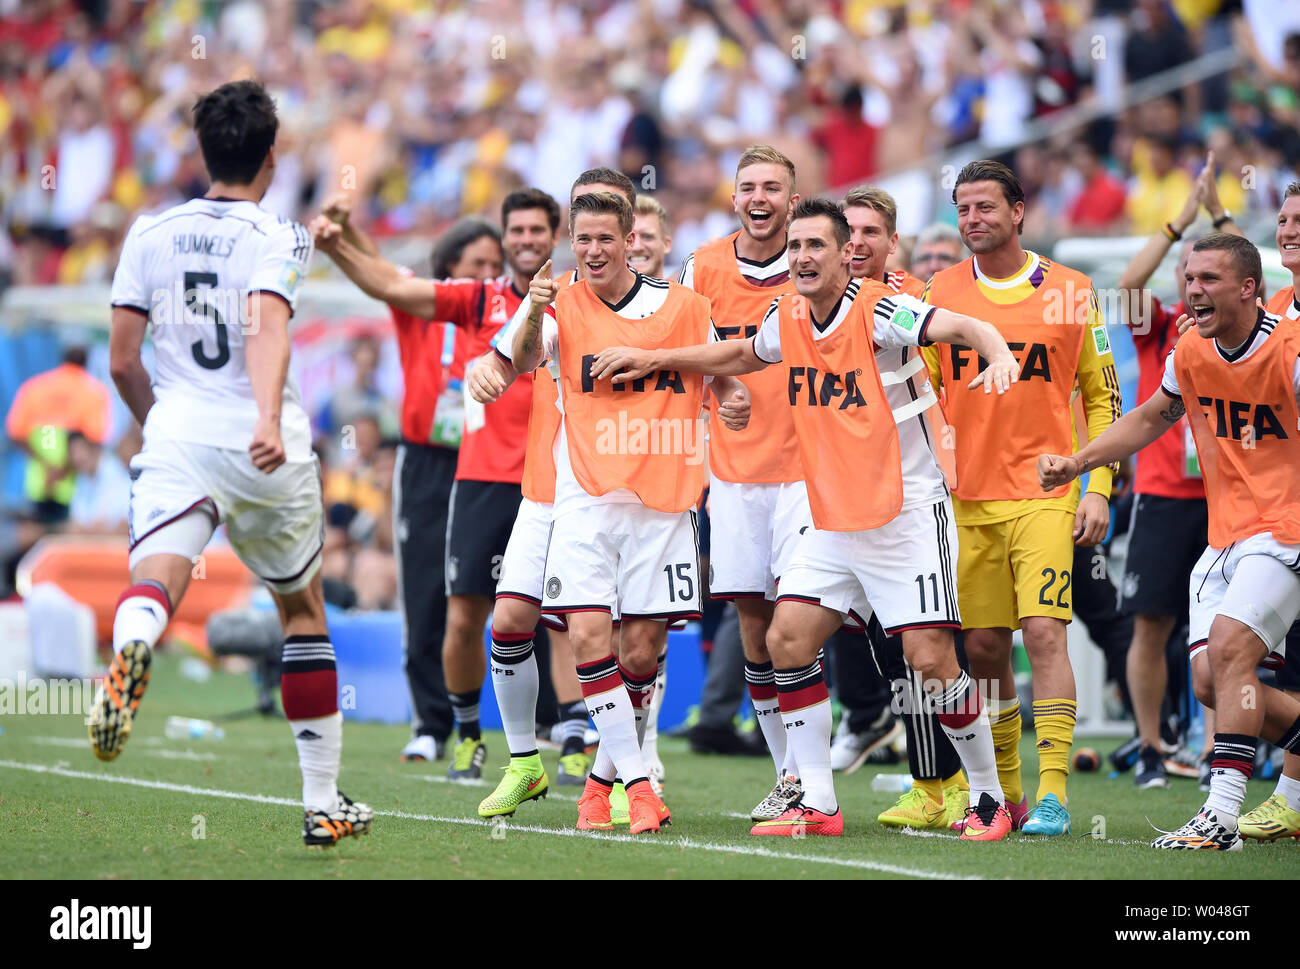 Mats Hummels of Germany celebrates scoring his side's second goal during the 2014 FIFA World Cup Group G match at the Arena Fonte Nova in Salvador, Brazil on June 16, 2014. UPI/Chris Brunskill Stock Photo